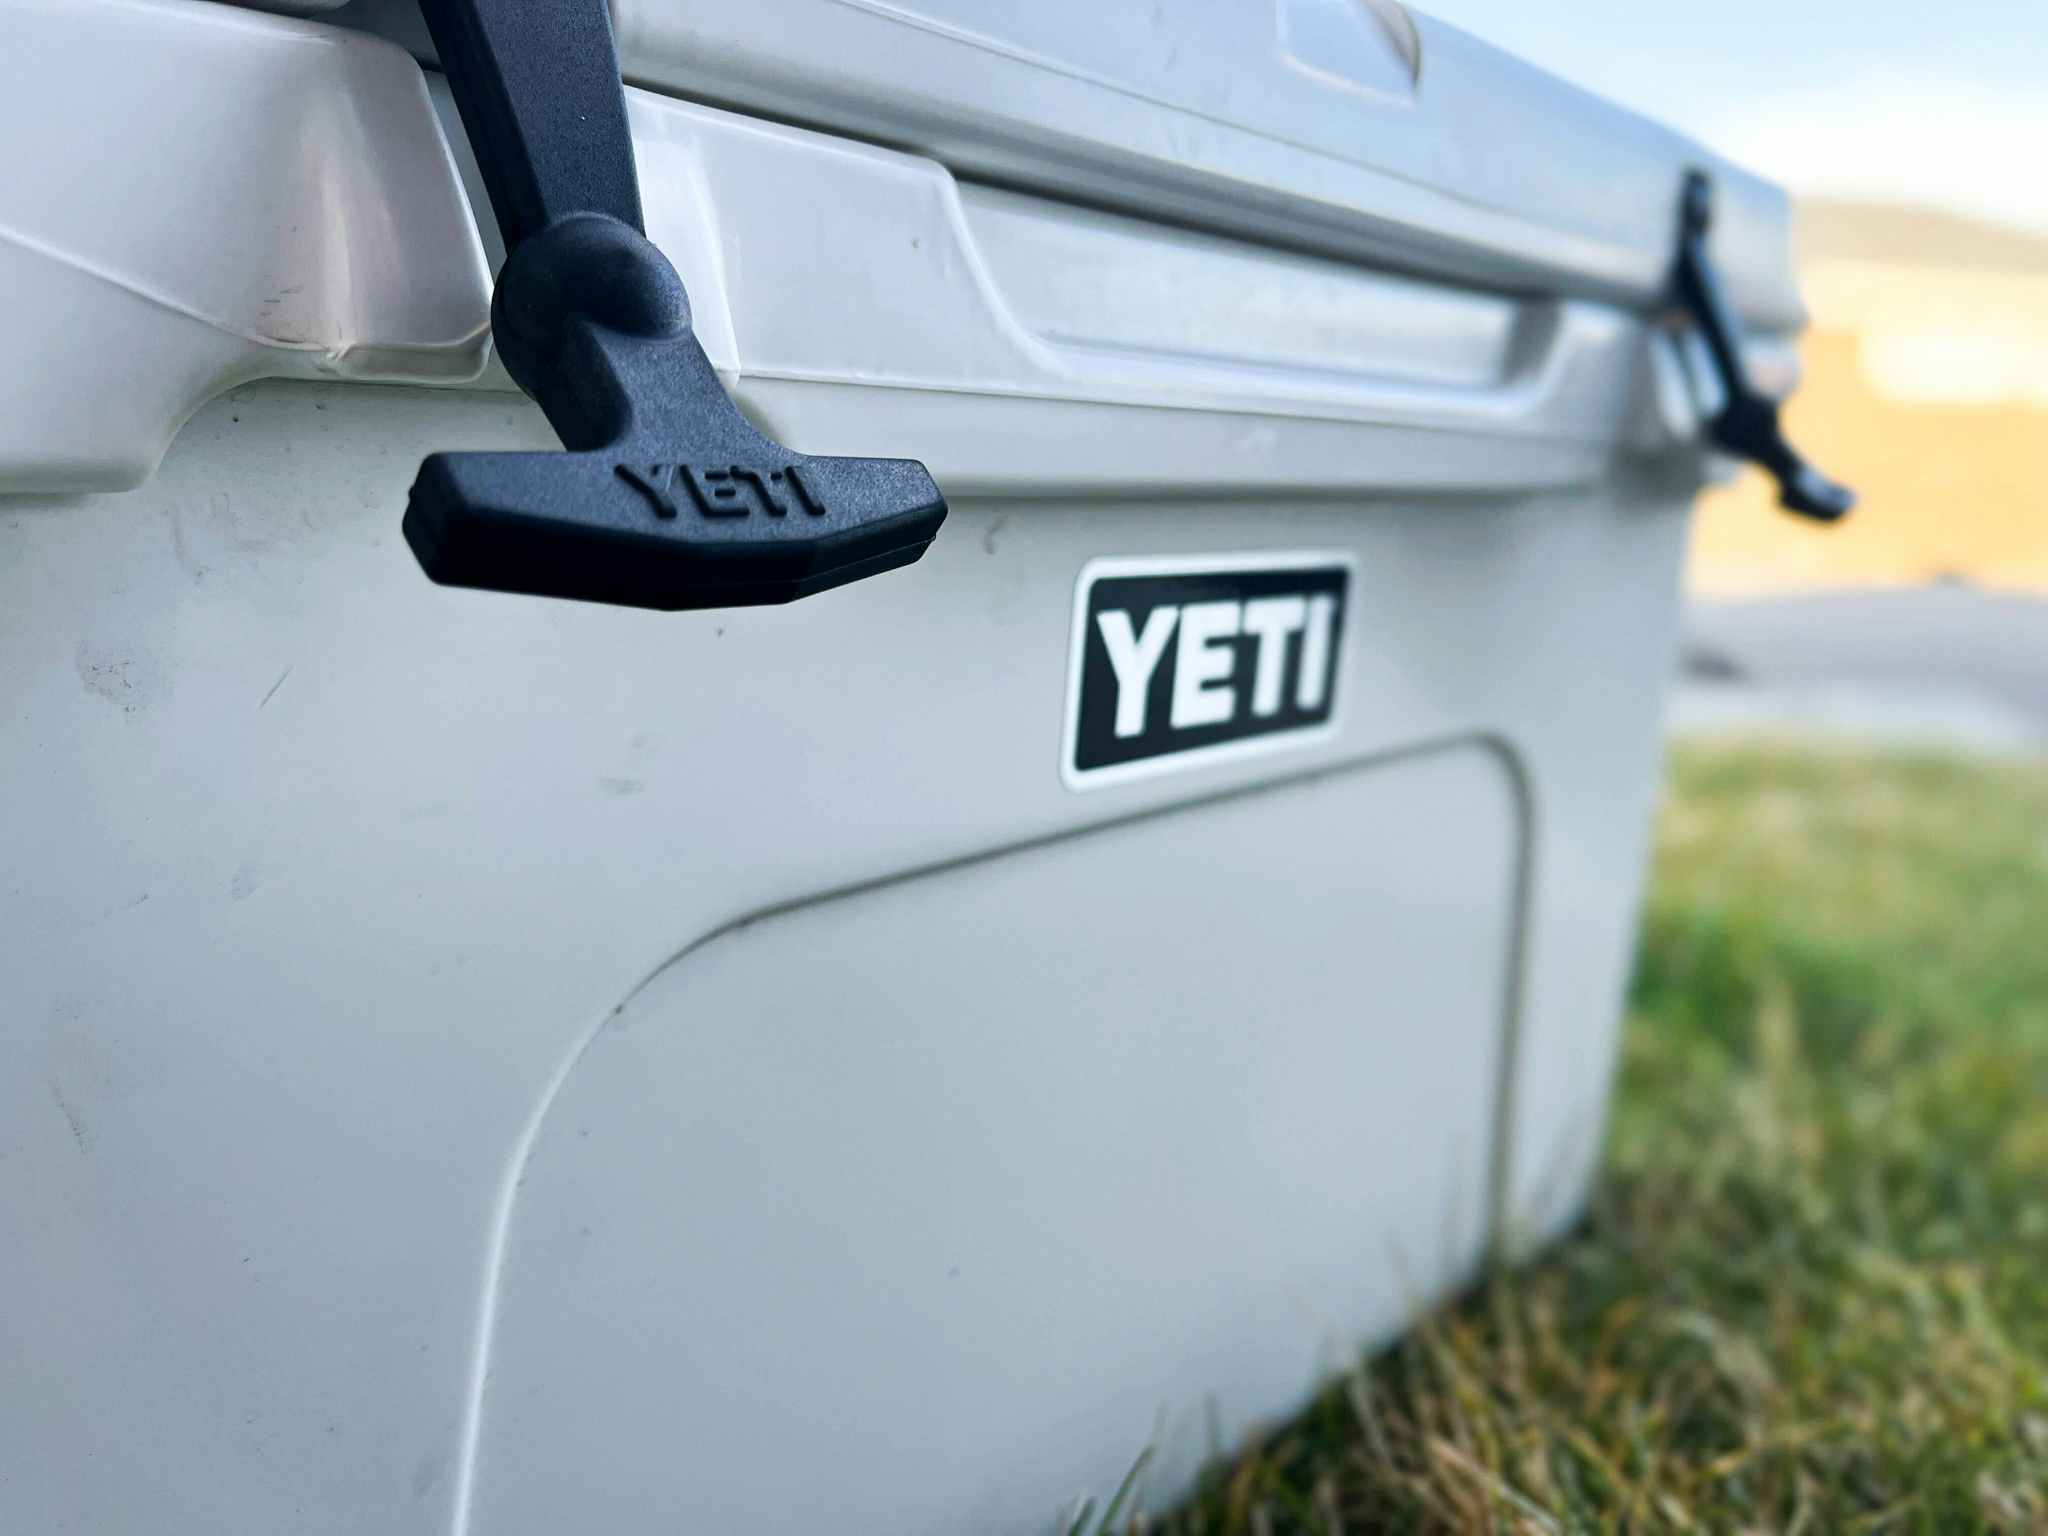 A close up of a YETI cooler sitting on the grass.